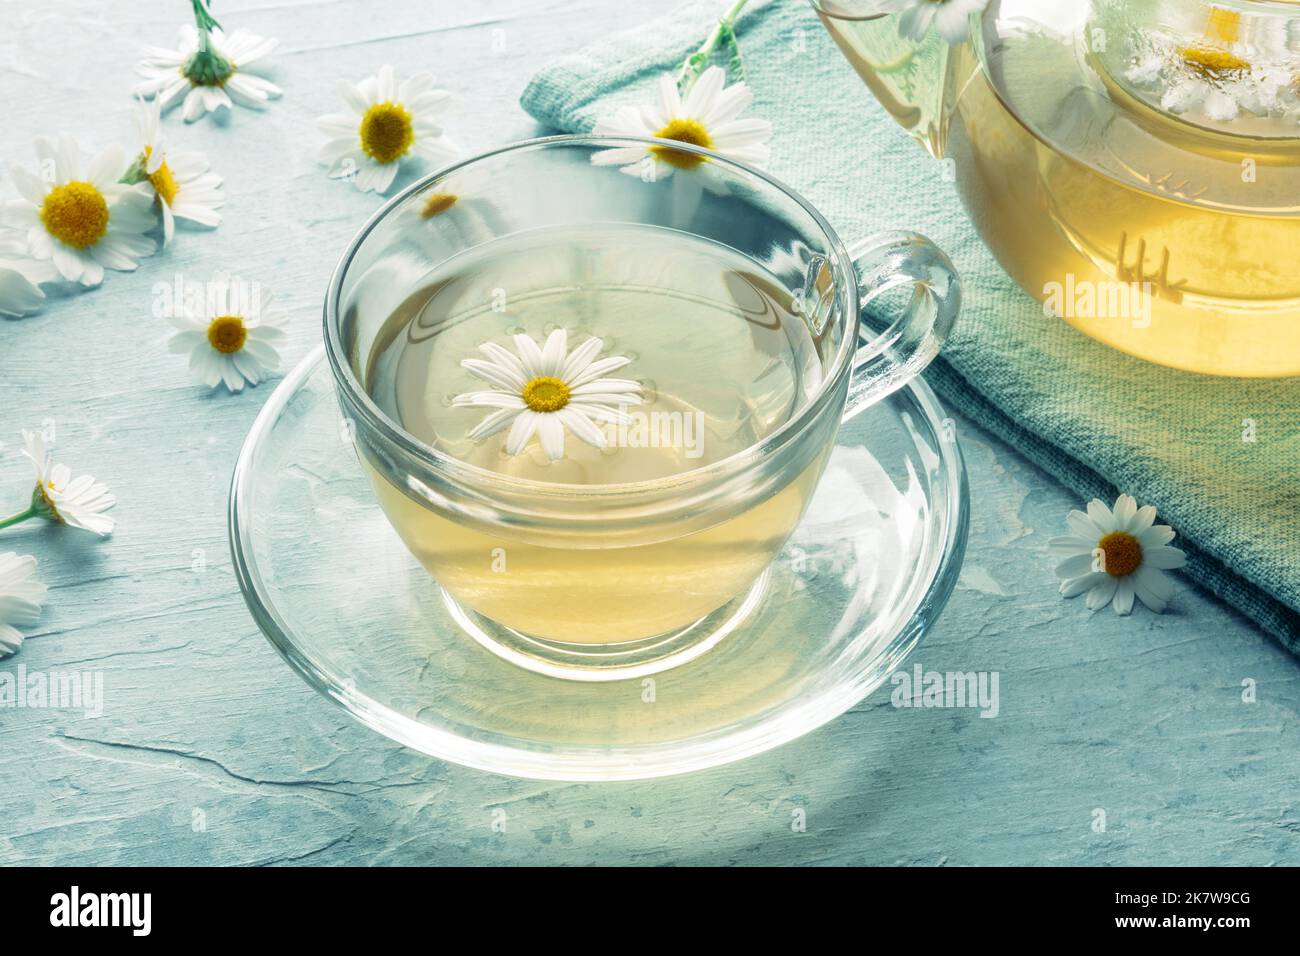 Camomile tea, floral infusion to heal and relax, natural treatment, organic tisane, with loose flowers Stock Photo